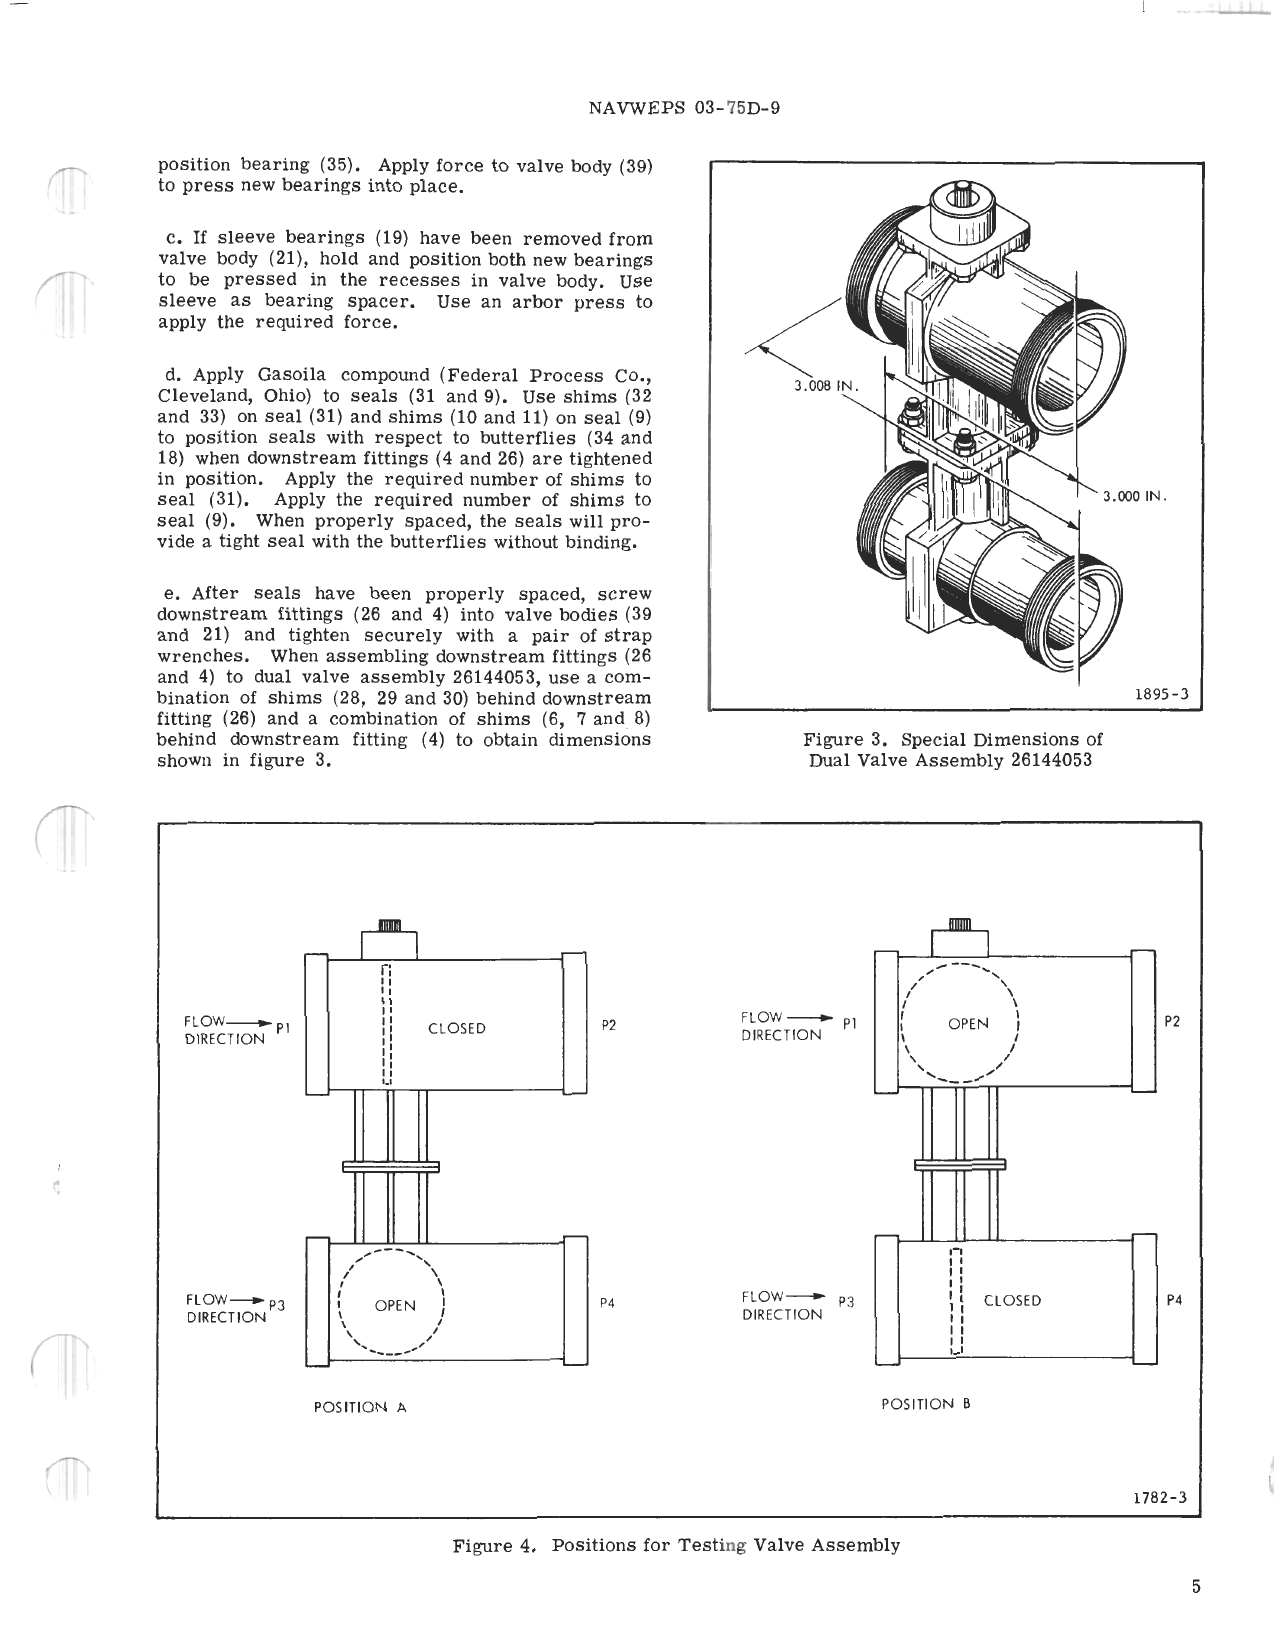 Sample page 5 from AirCorps Library document: Overhaul Instructions with Illustrated Parts Breakdown for Dual Valve Assy - Parts 25734202, 26044013, and 26144053